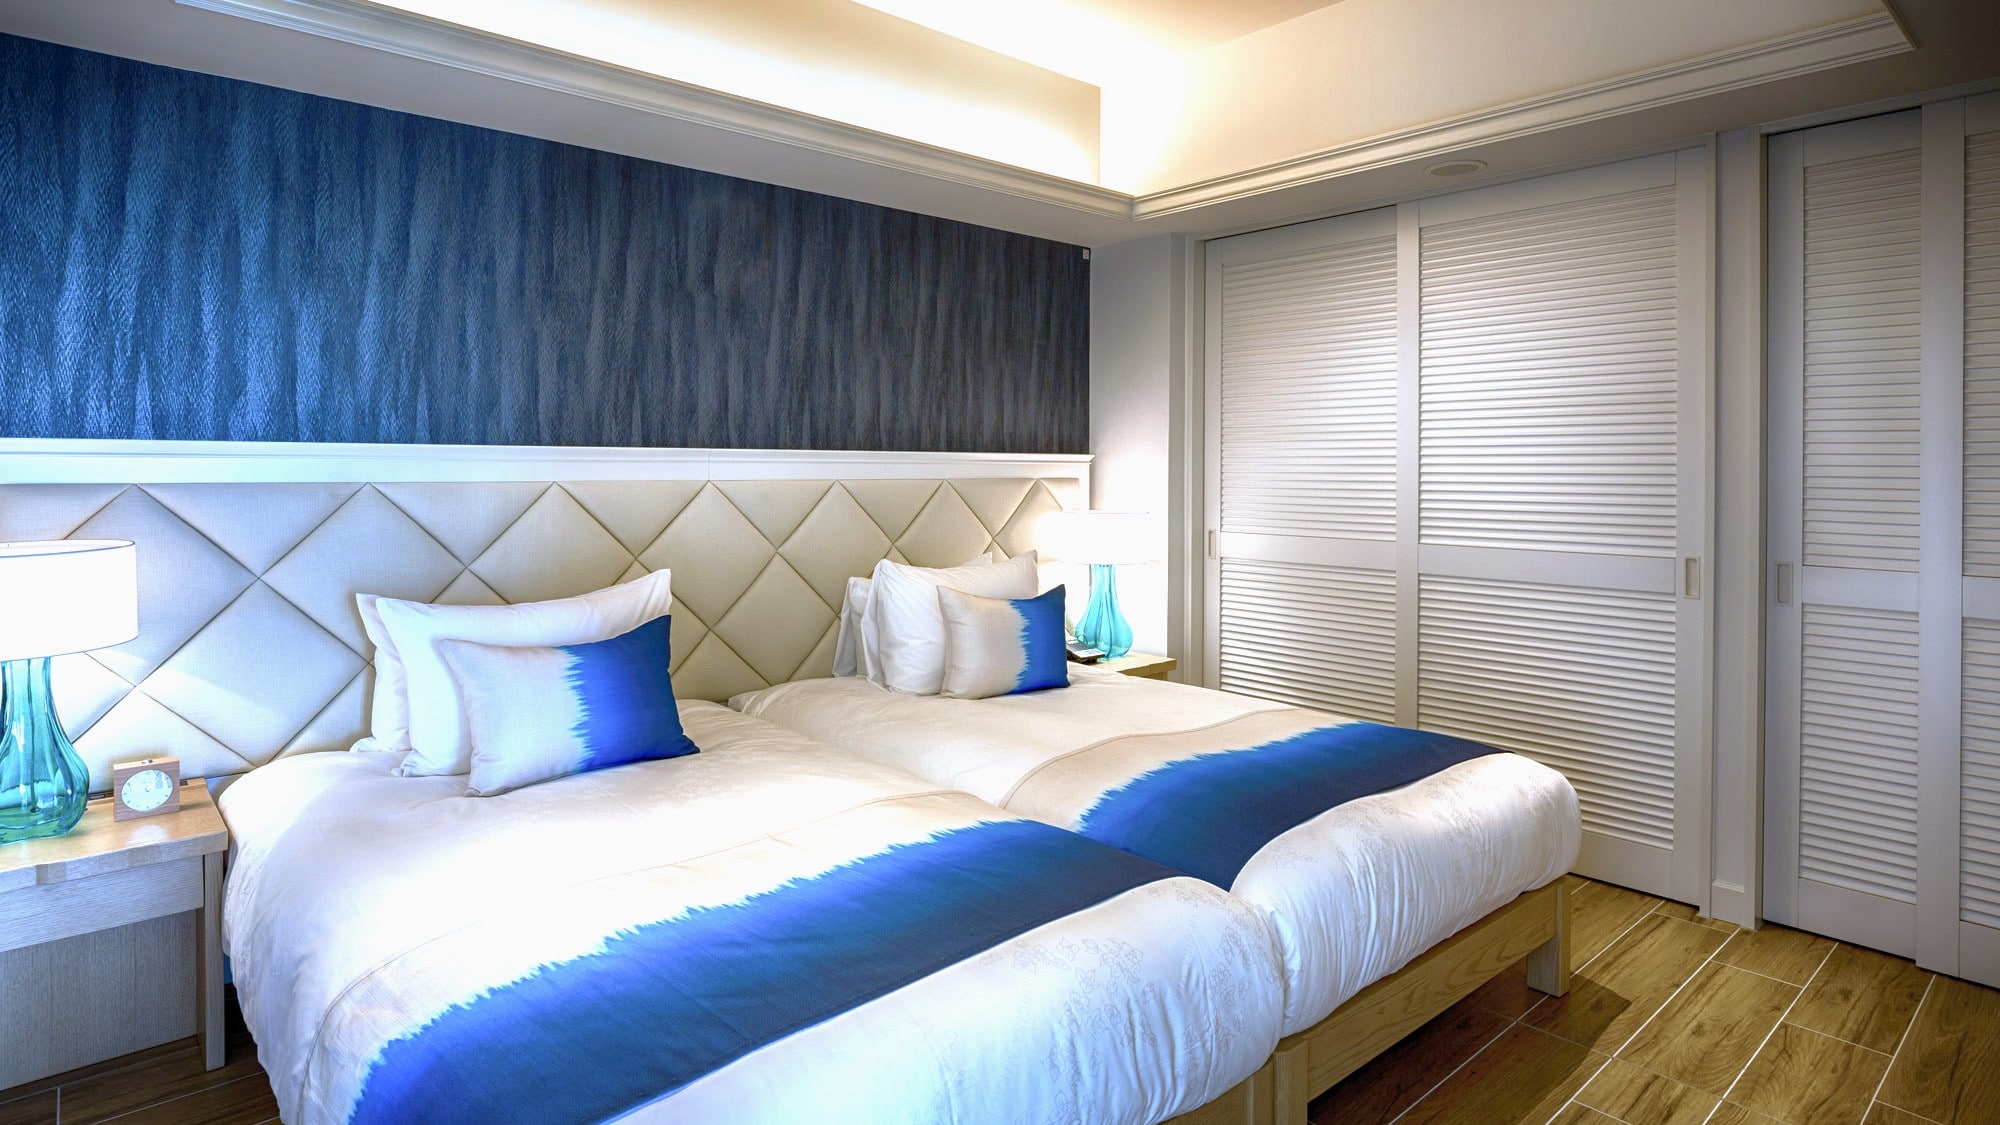 [Bayside/Junior Suite] Accommodates up to 3 people.